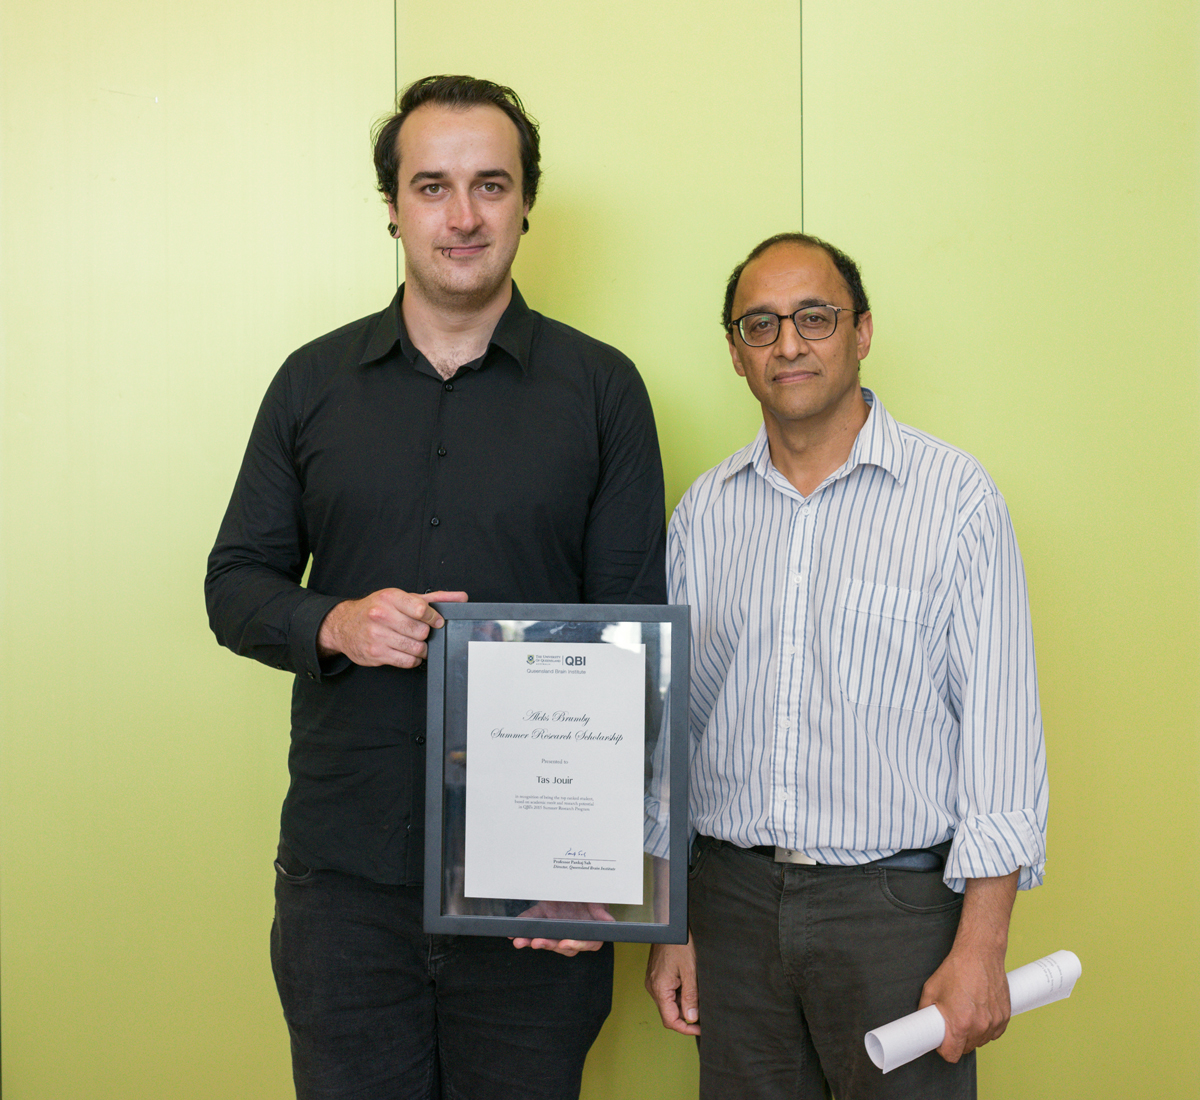 Tas Jouir is awarded the Aleks Brumby Summer Research Scholarship